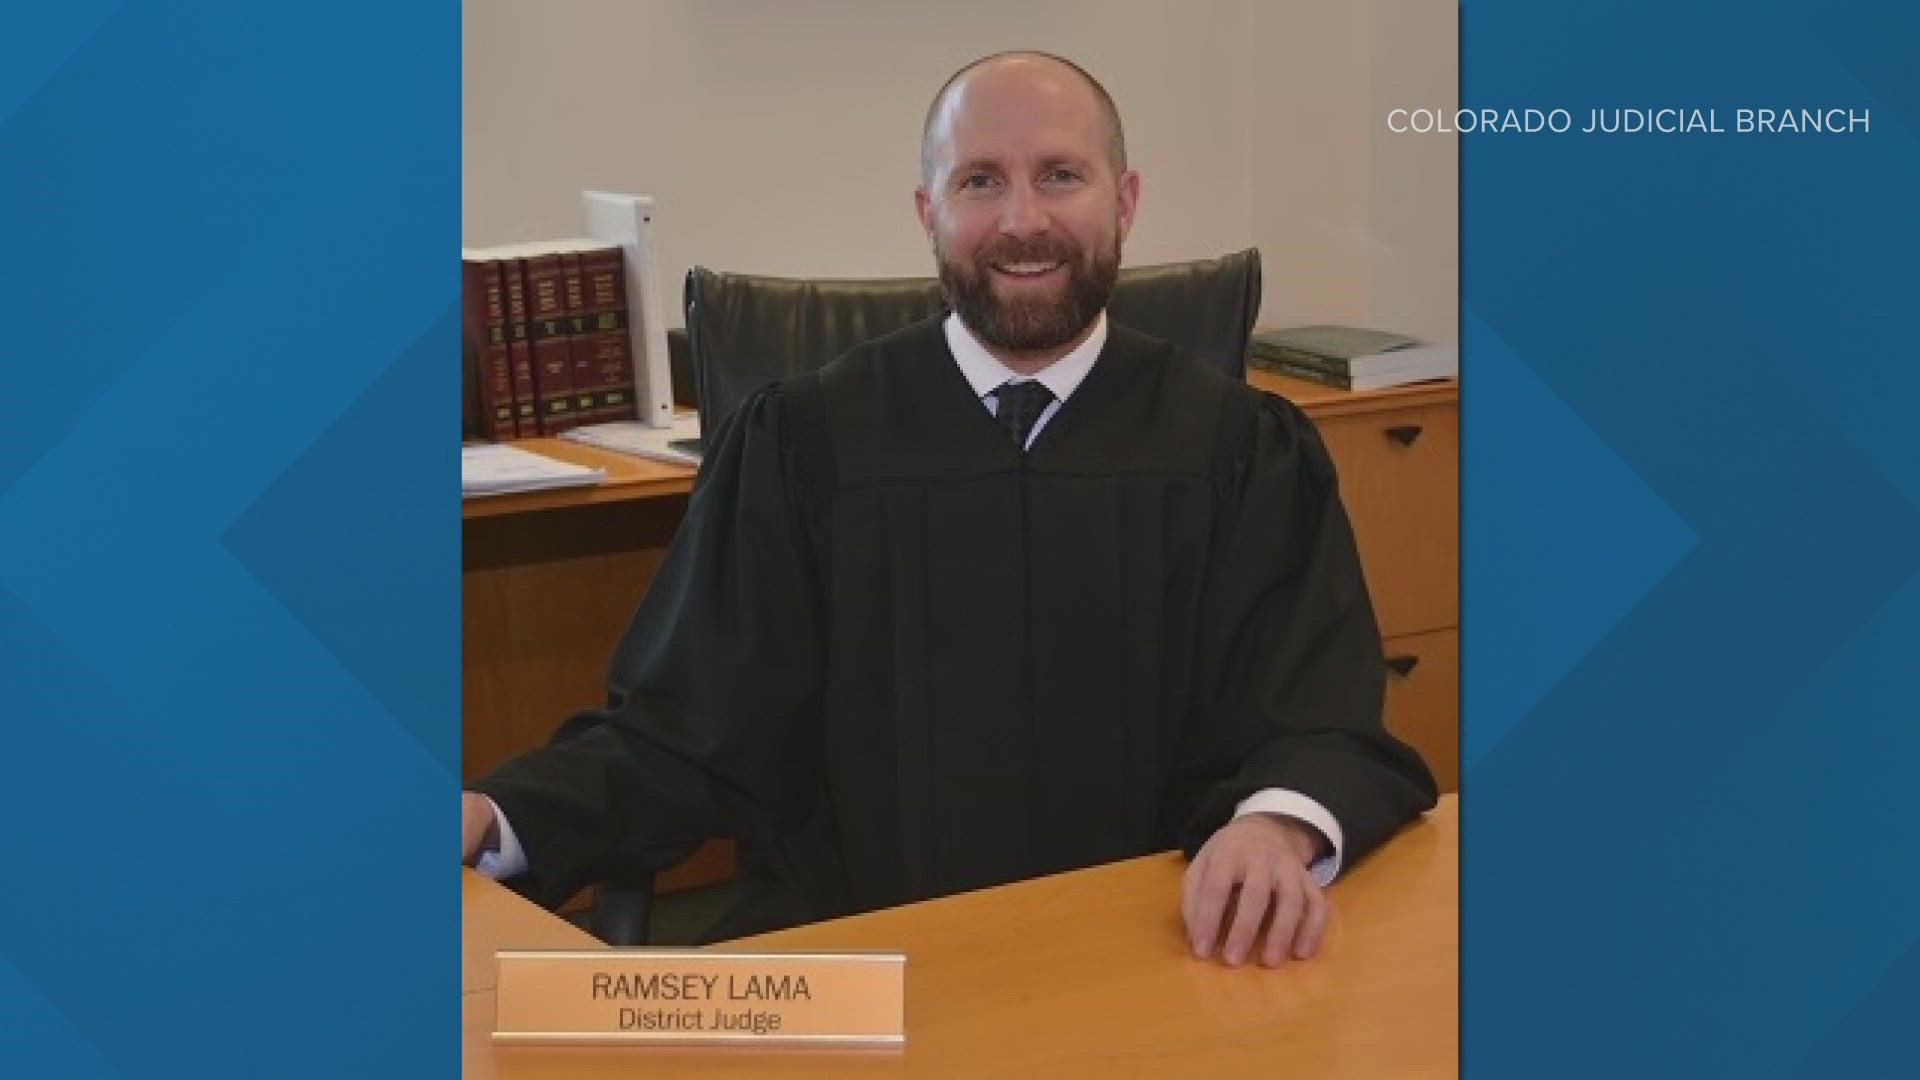 After more than 6 years on the bench, 11th Judicial District Judge Ramsey Lama is stepping down due to health reasons.